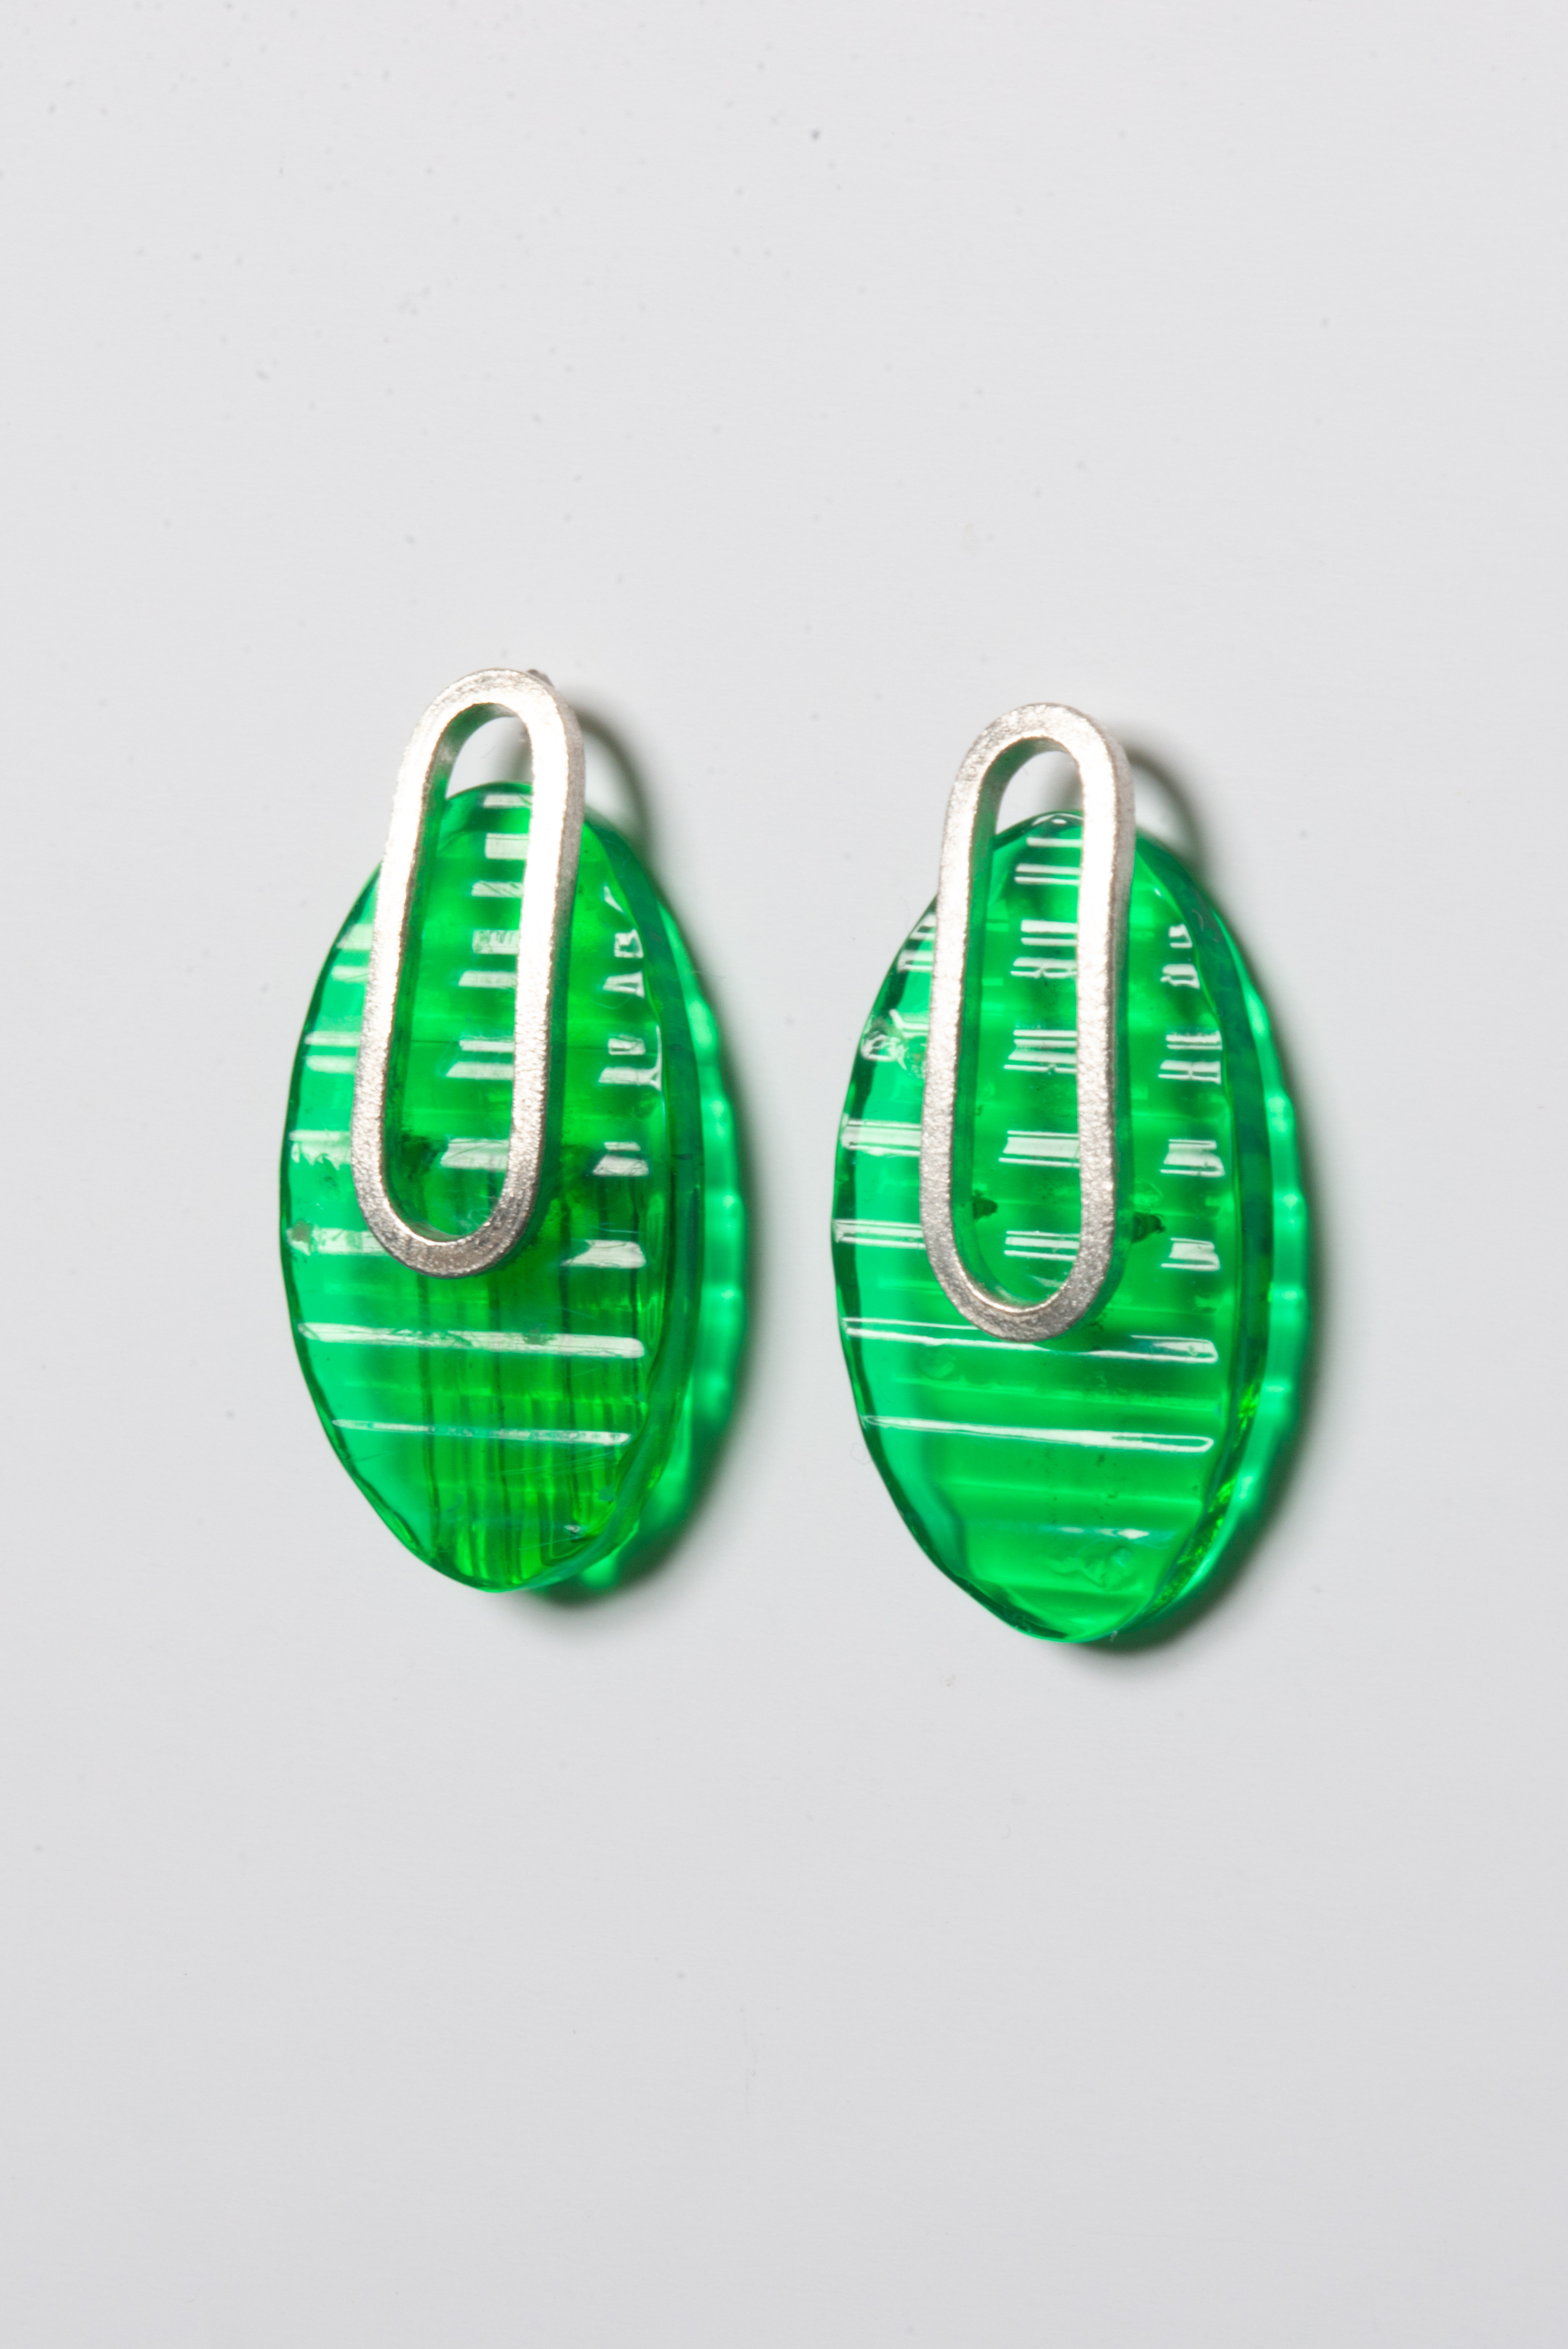 Signal Collection: Oval Stud Earrings